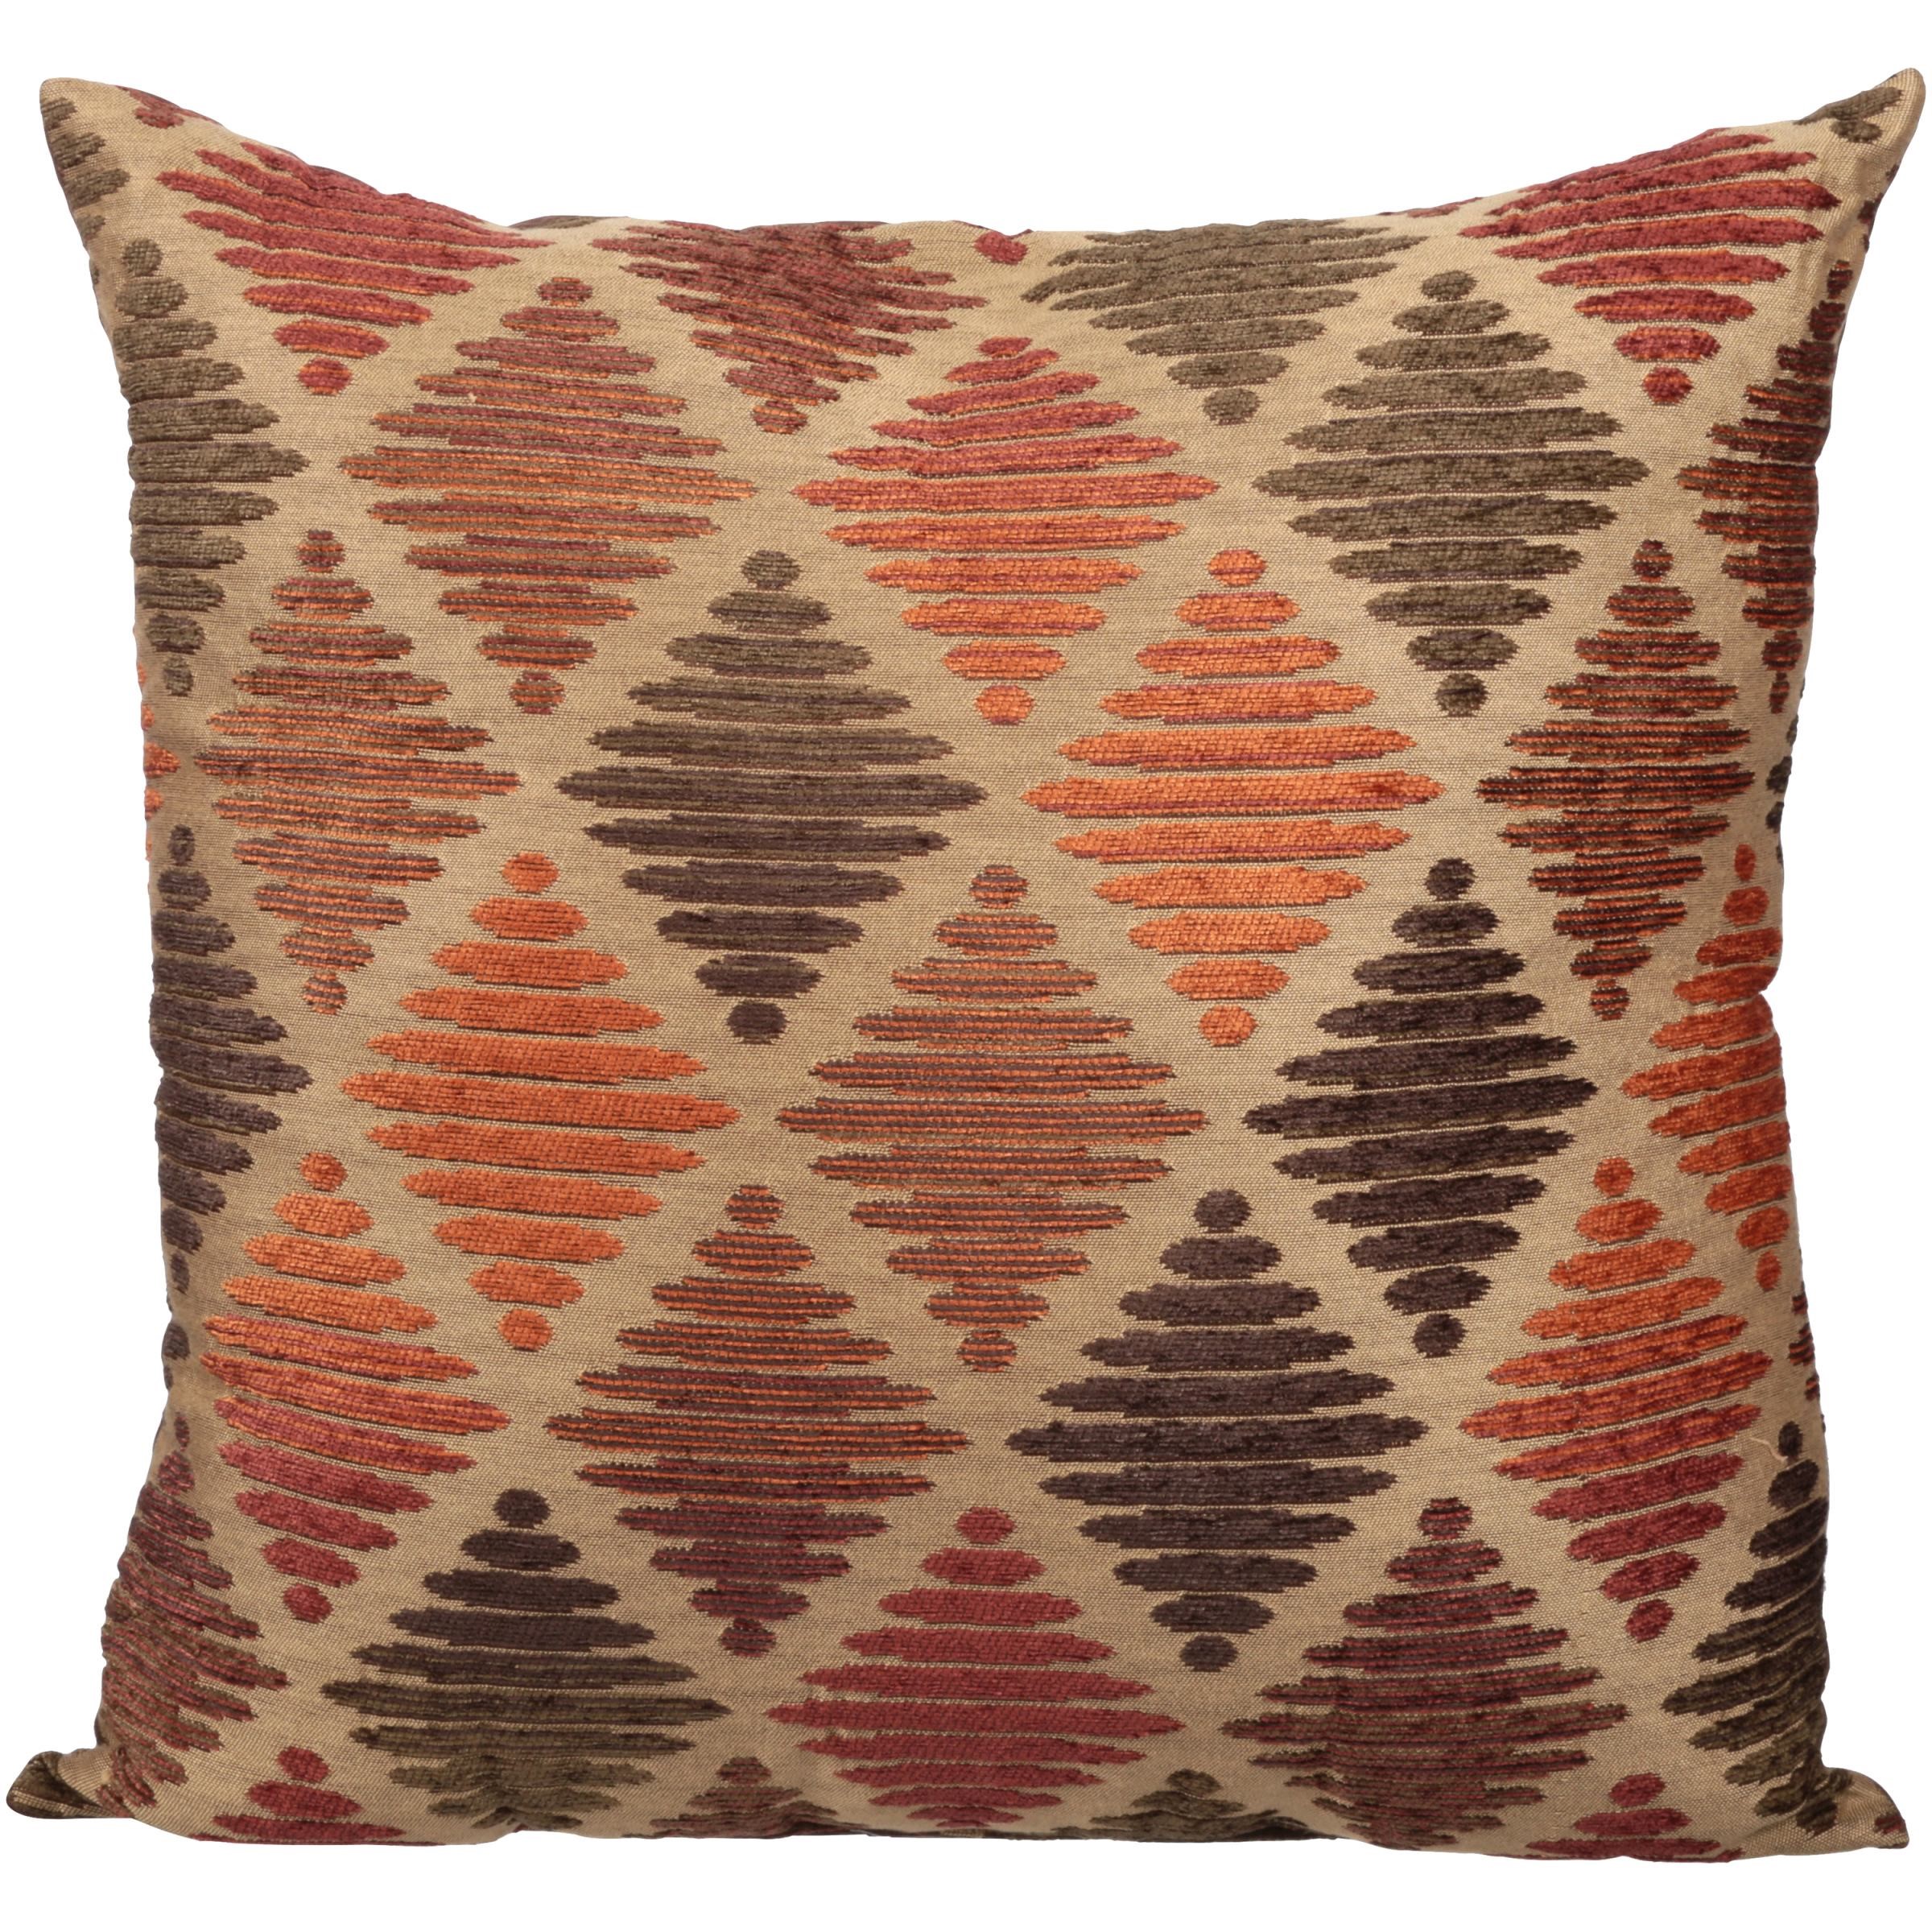 Better Homes and Gardens? Rust Diamond Pillow - image 1 of 4